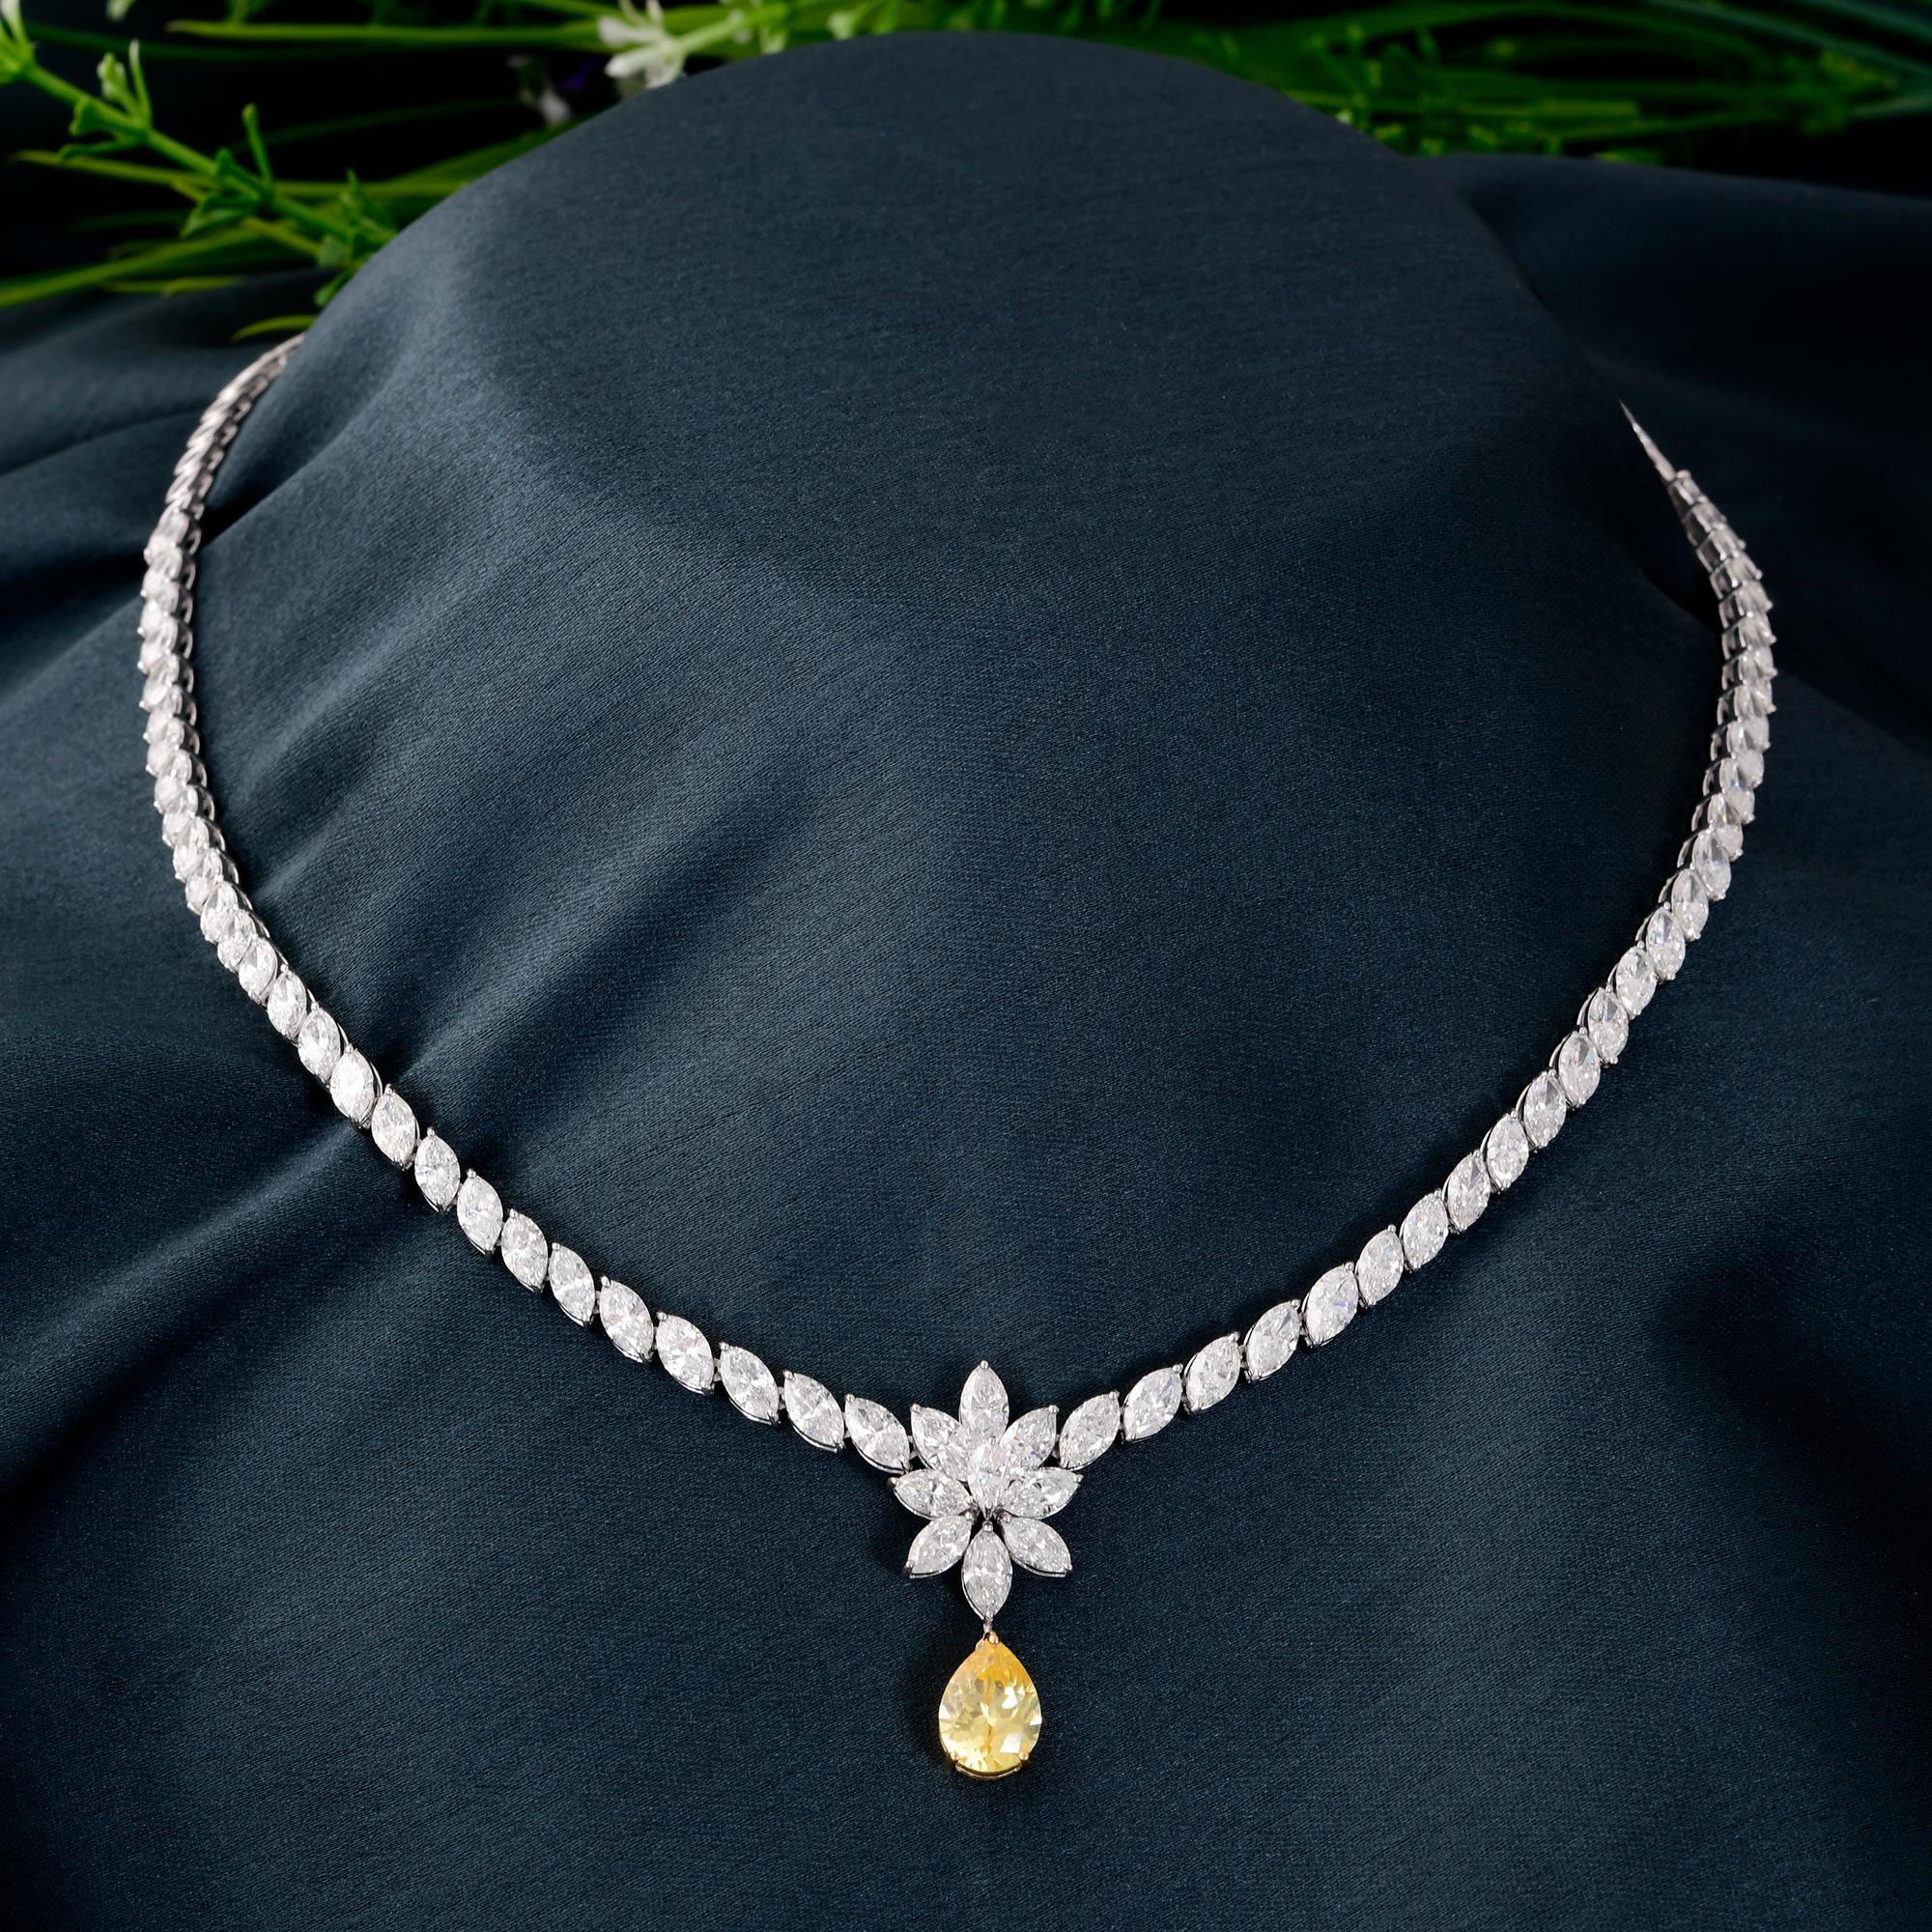 Marquise Cut Pear Gemstone Necklace Marquise Diamond 14 Karat White Gold Handmade Jewelry For Sale